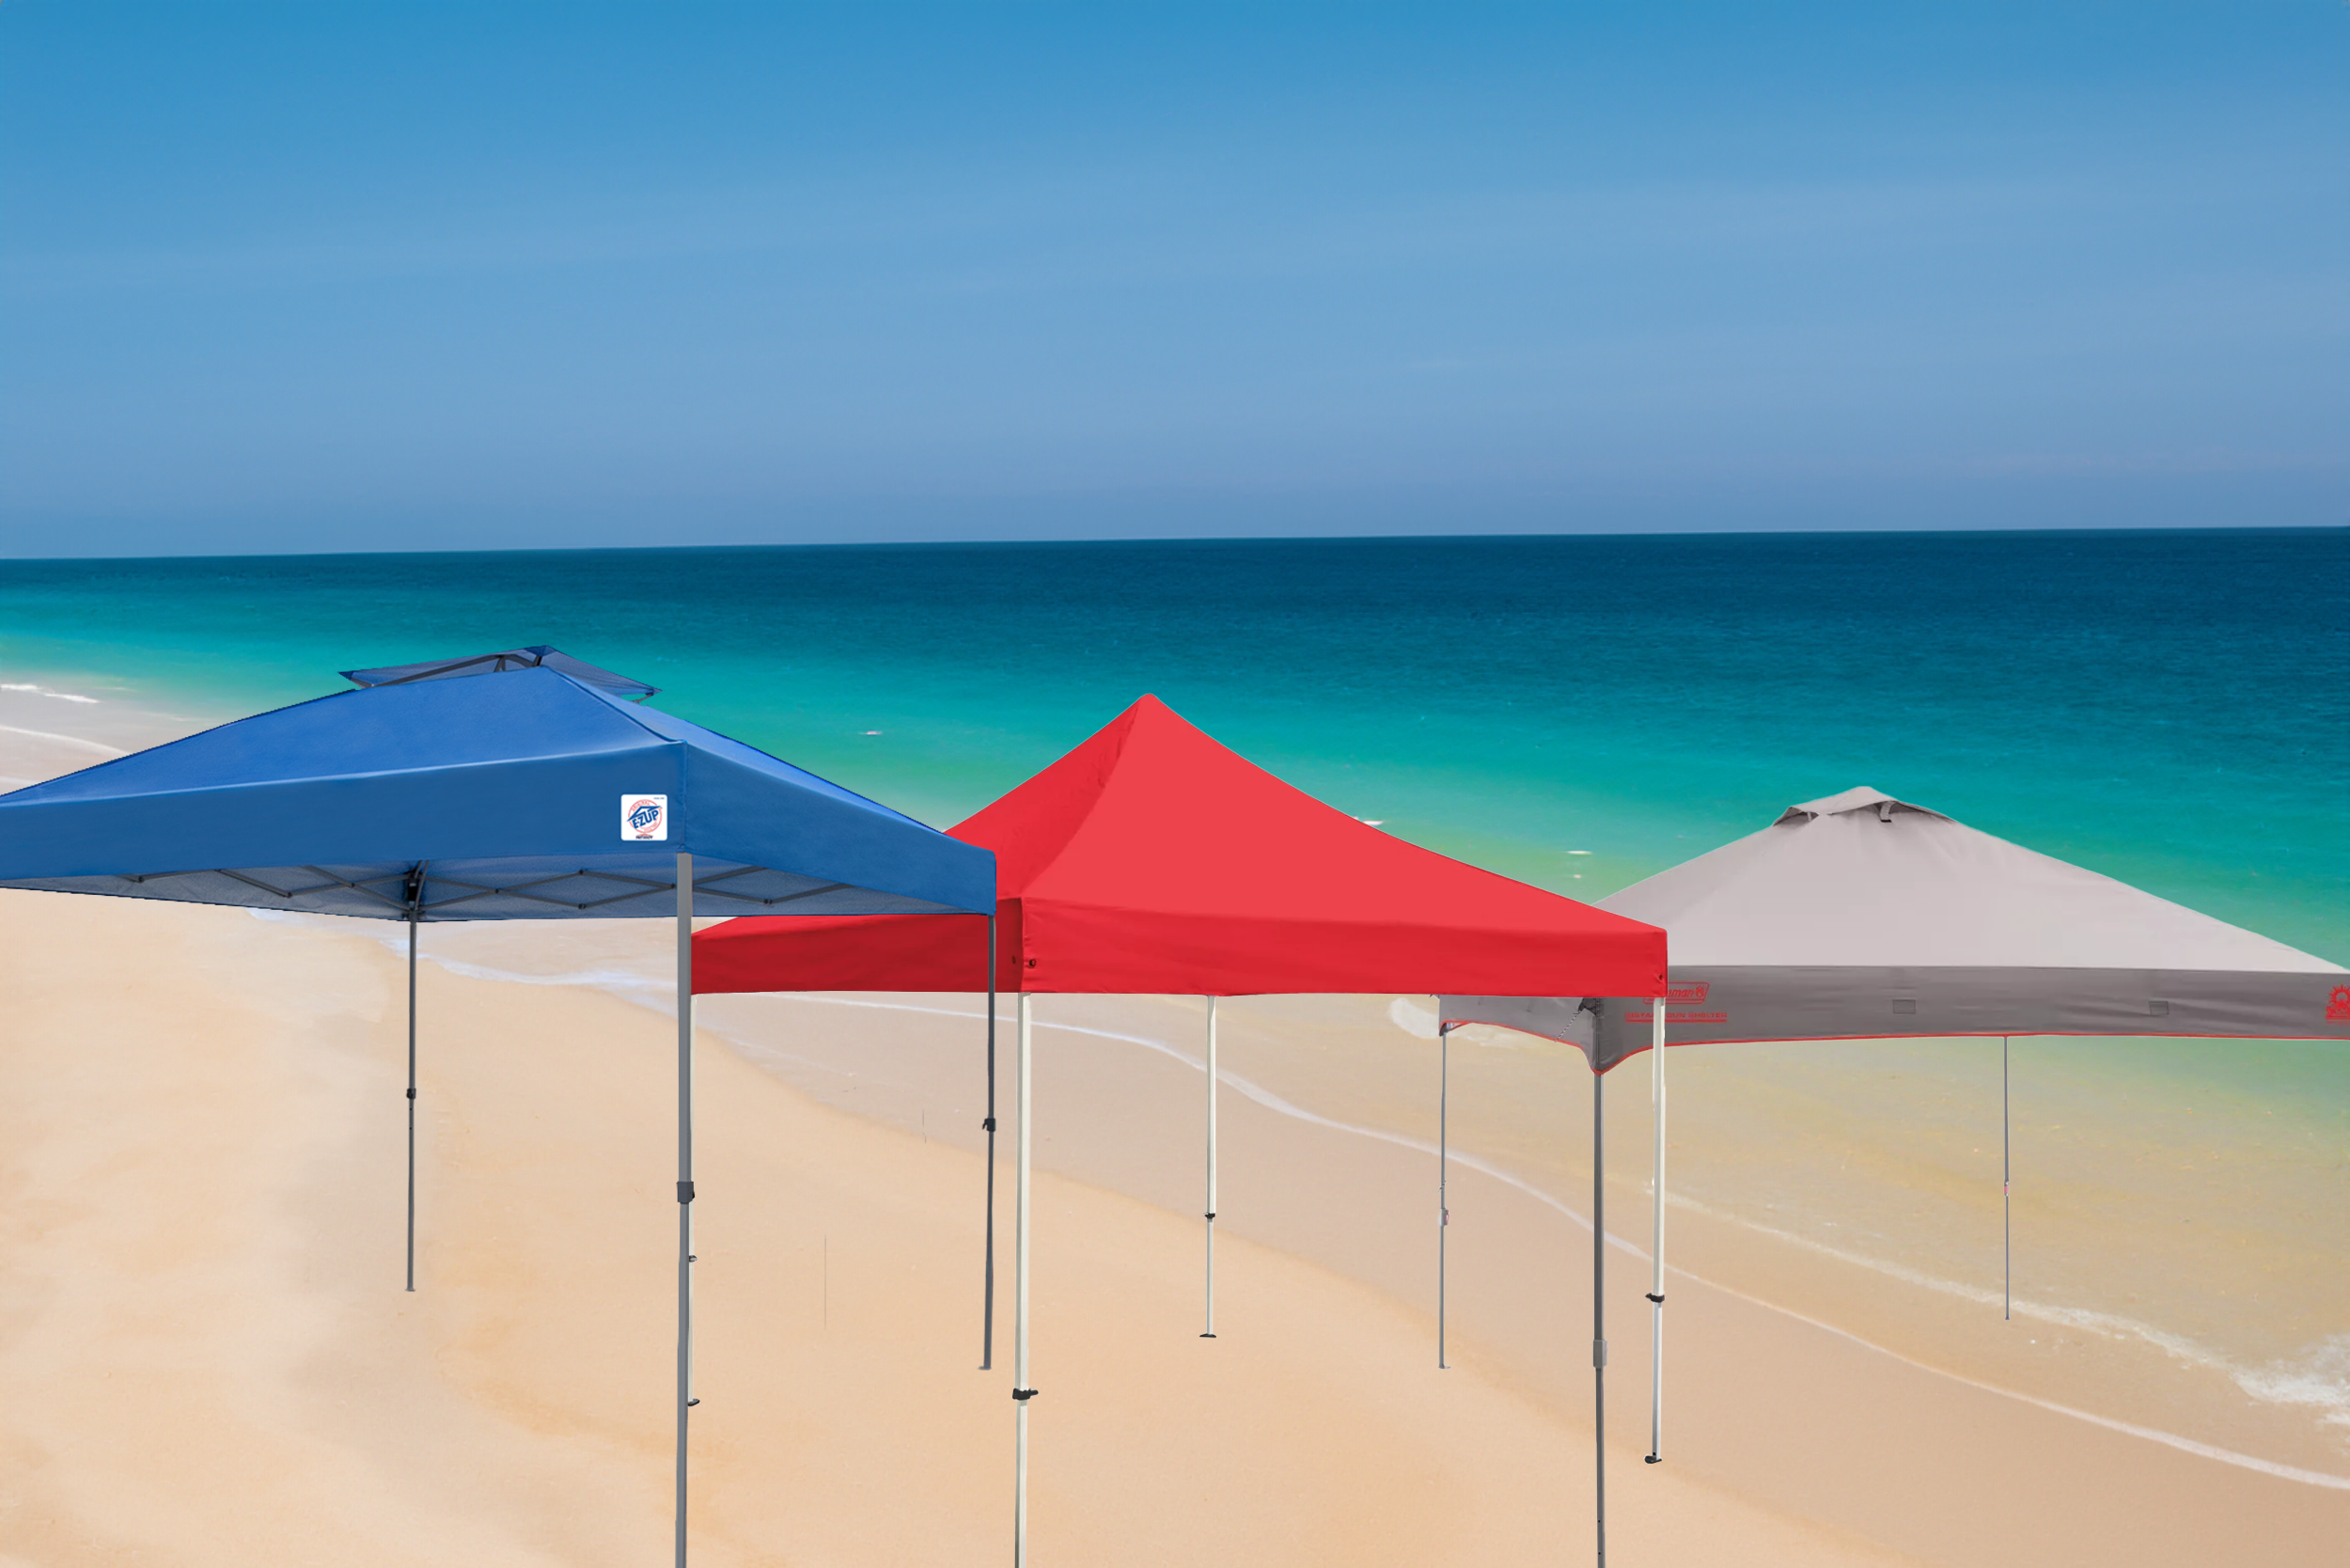 Three canopies on the sandy shore of the sea with a turquoise ocean in the background. The canopies are colored blue, red, and gray, set against a backdrop of a blue sky.